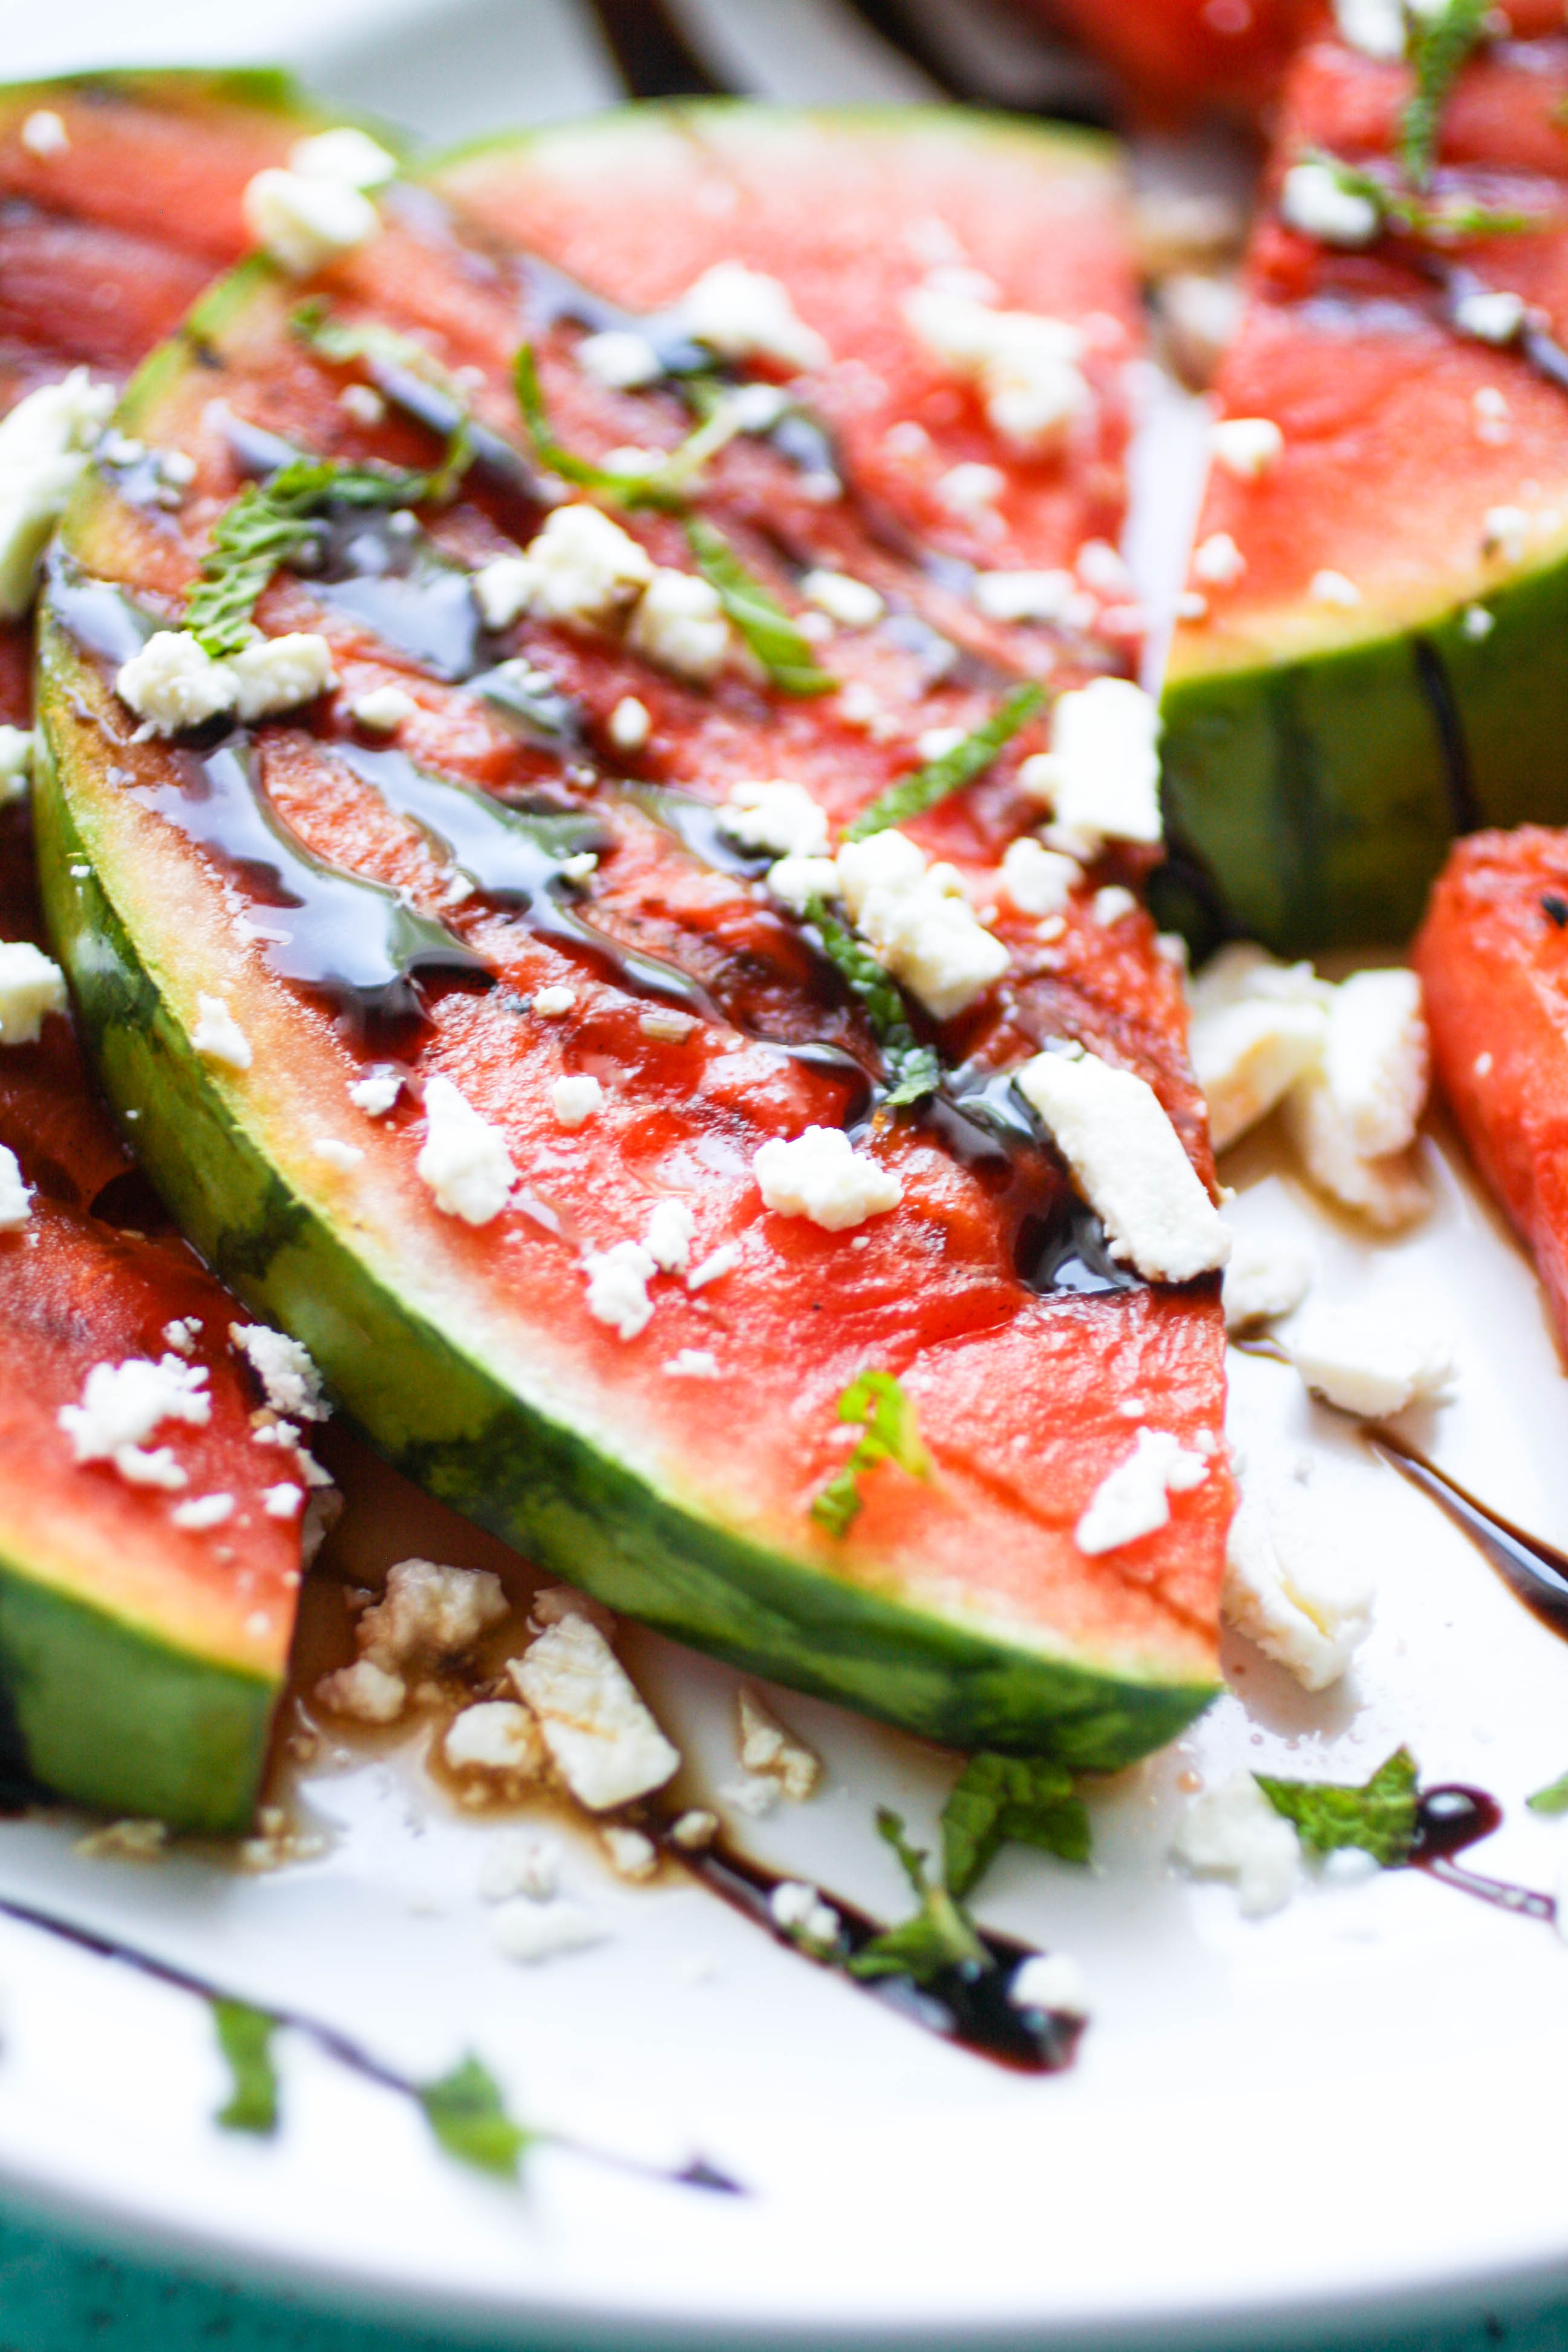 Grilled Watermelon with Feta, Mint, and Balsamic Glaze is a nice appetizer for the season. Grilled Watermelon with Feta, Mint, and Balsamic Glaze is a delightful way to start your next summer meal.